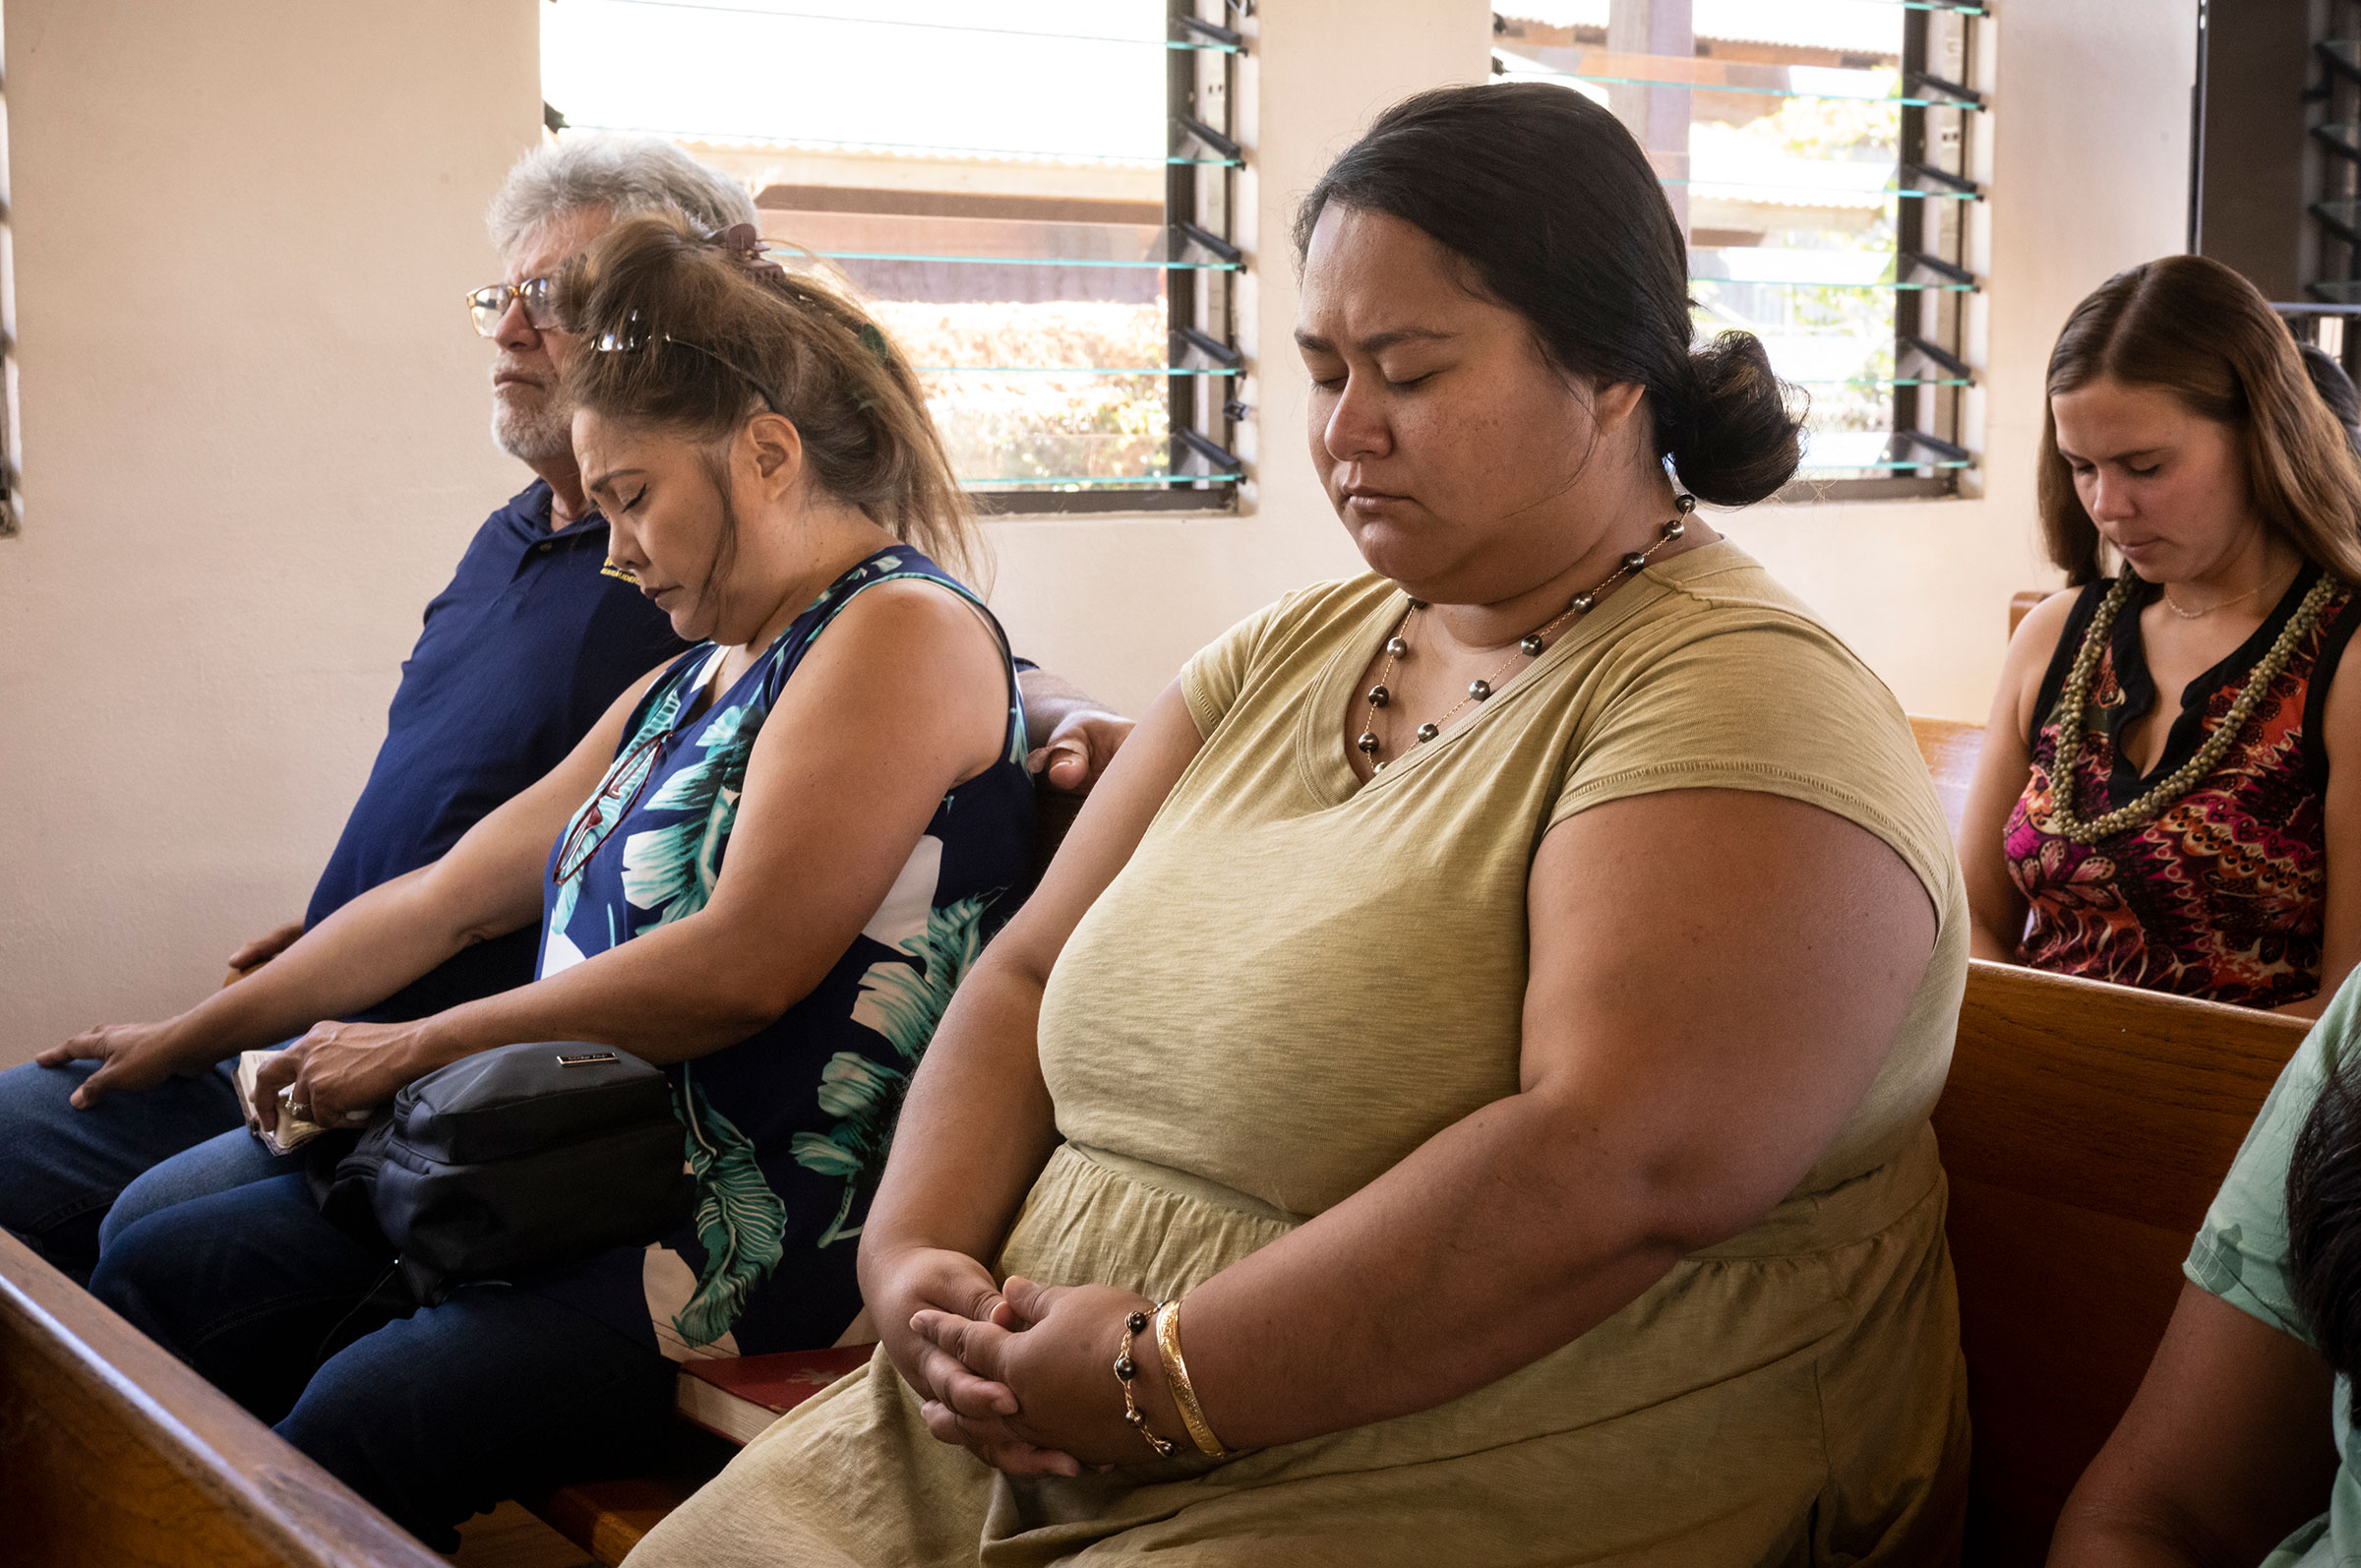 August 13, 2023  Wailuku, Hawaii   At the first Sunday service since the deadly fires last week, parishioners of the Kupaianaha church  pray for healing after the tragedy. Much of Sunday’s service was devoted to finding purpose in spiritual thoughts and also practical efforts by the community to deliver aid to victimes. Photo by David Butow for TIME.